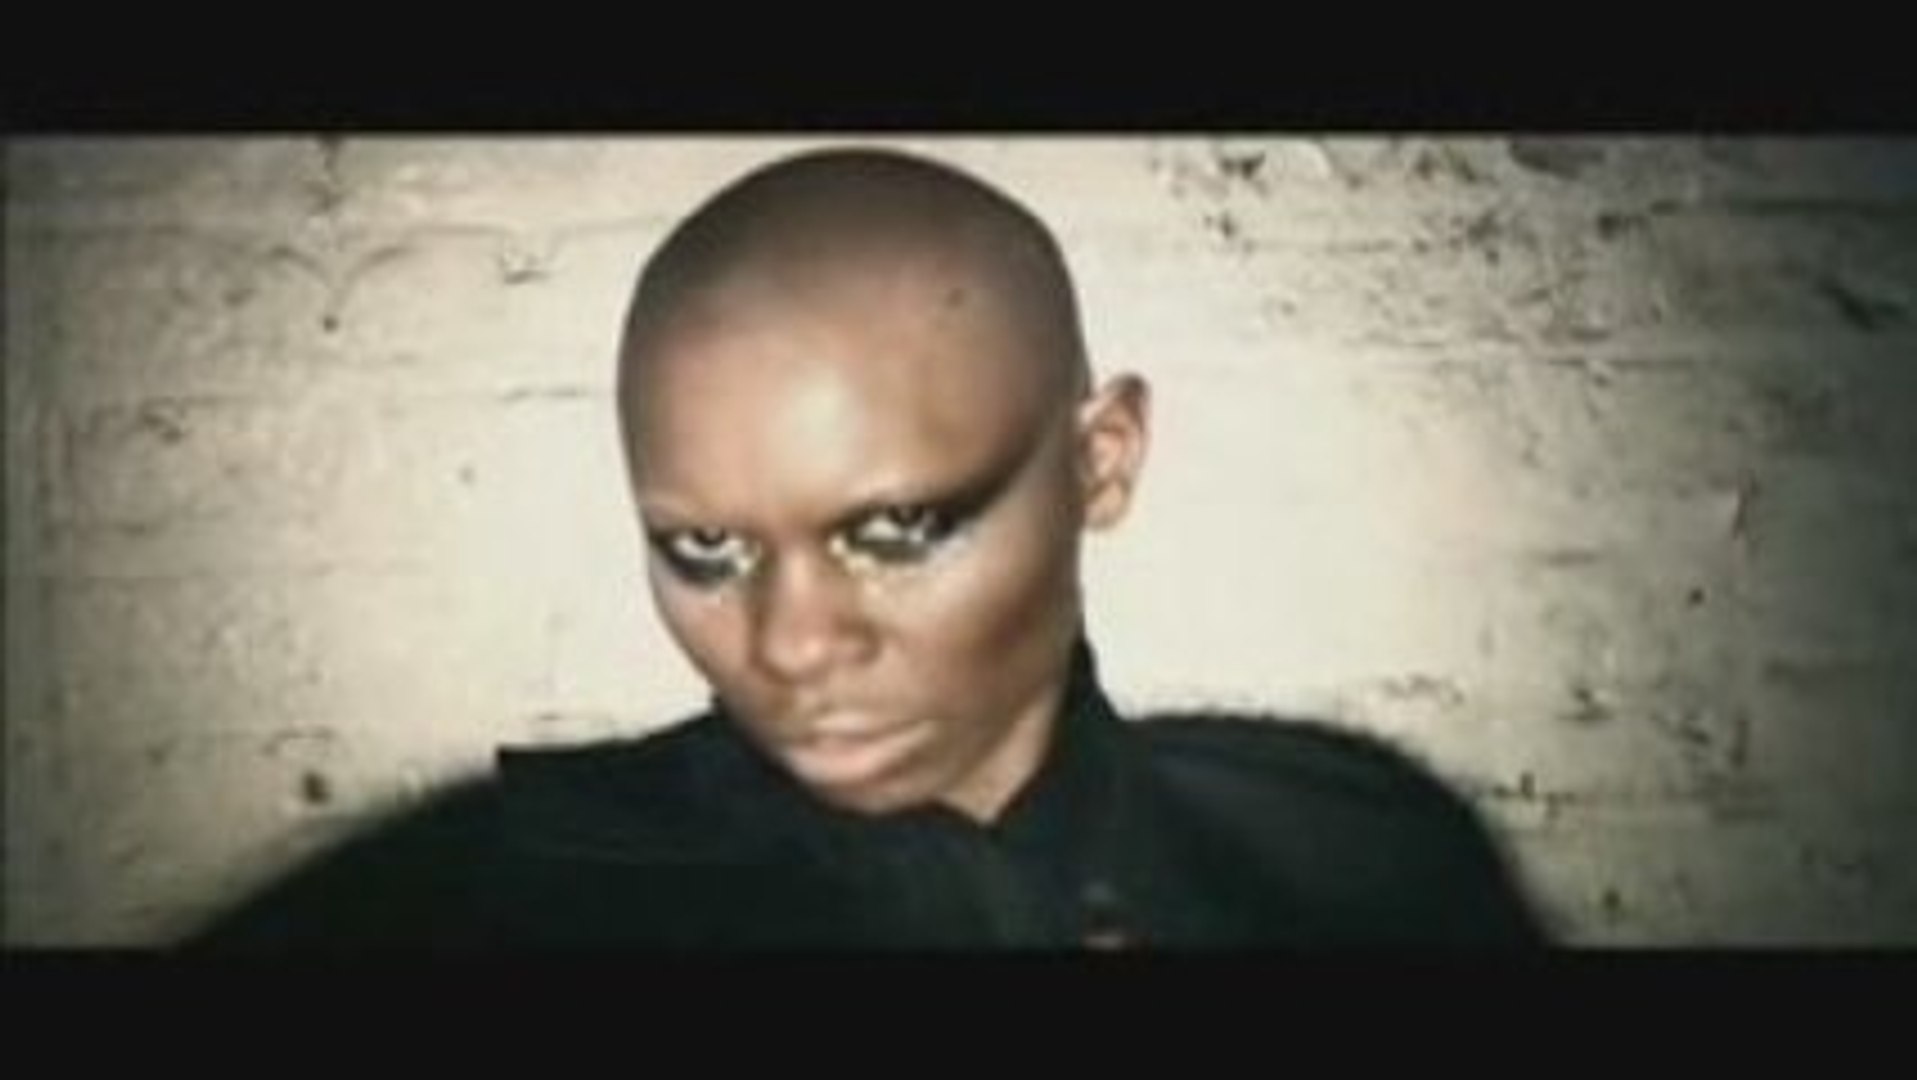 Skunk Anansie - Tear the place up